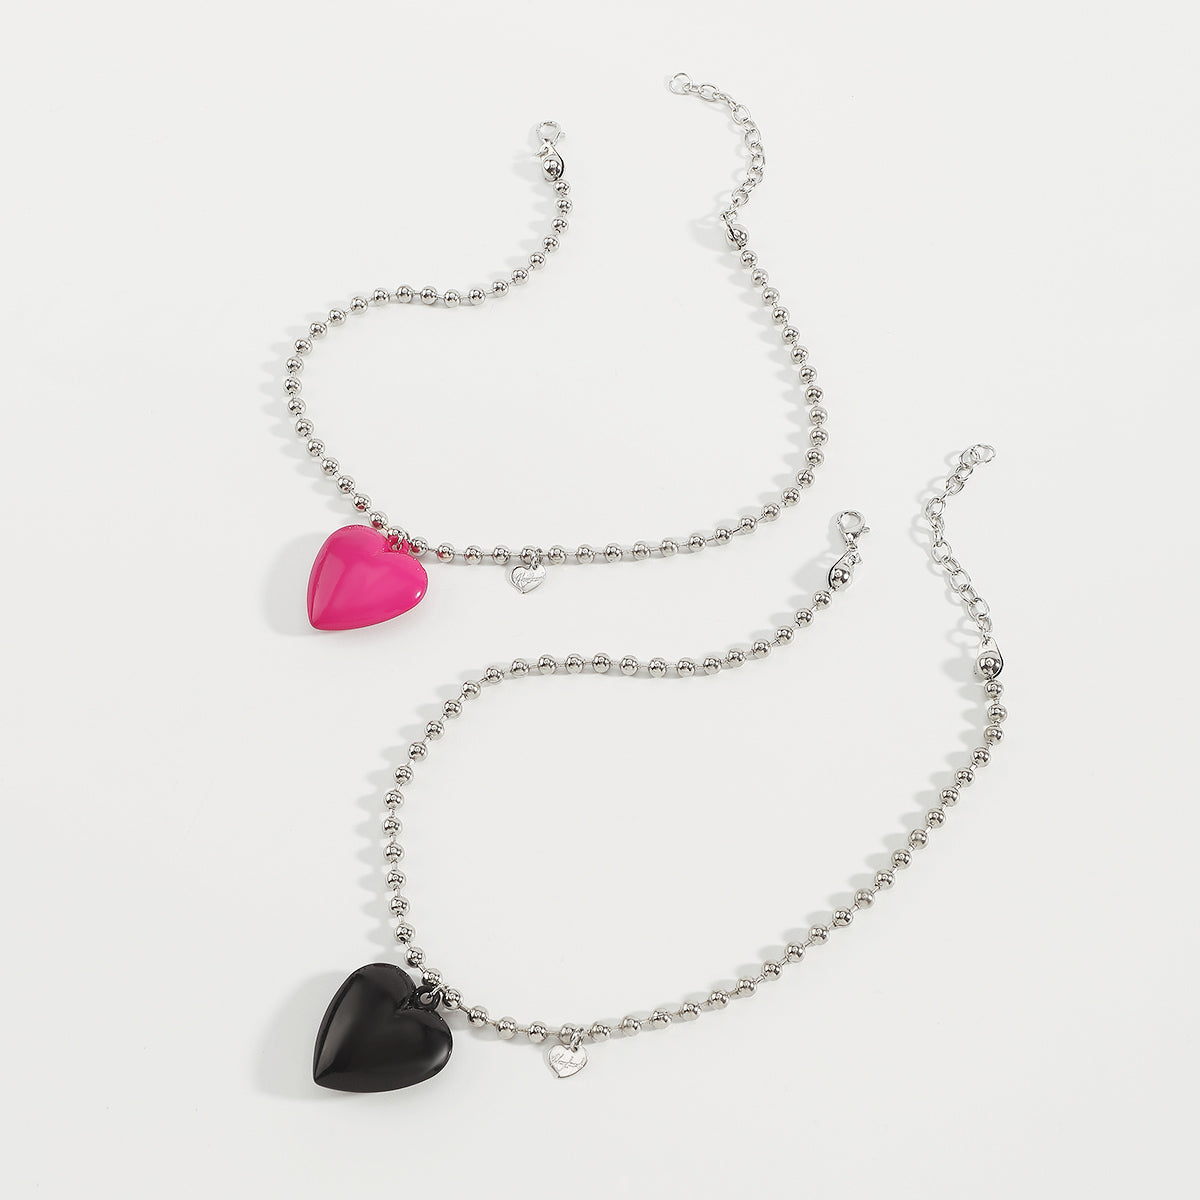 N11416 Metal Bead Chain Heart Pendant Necklace